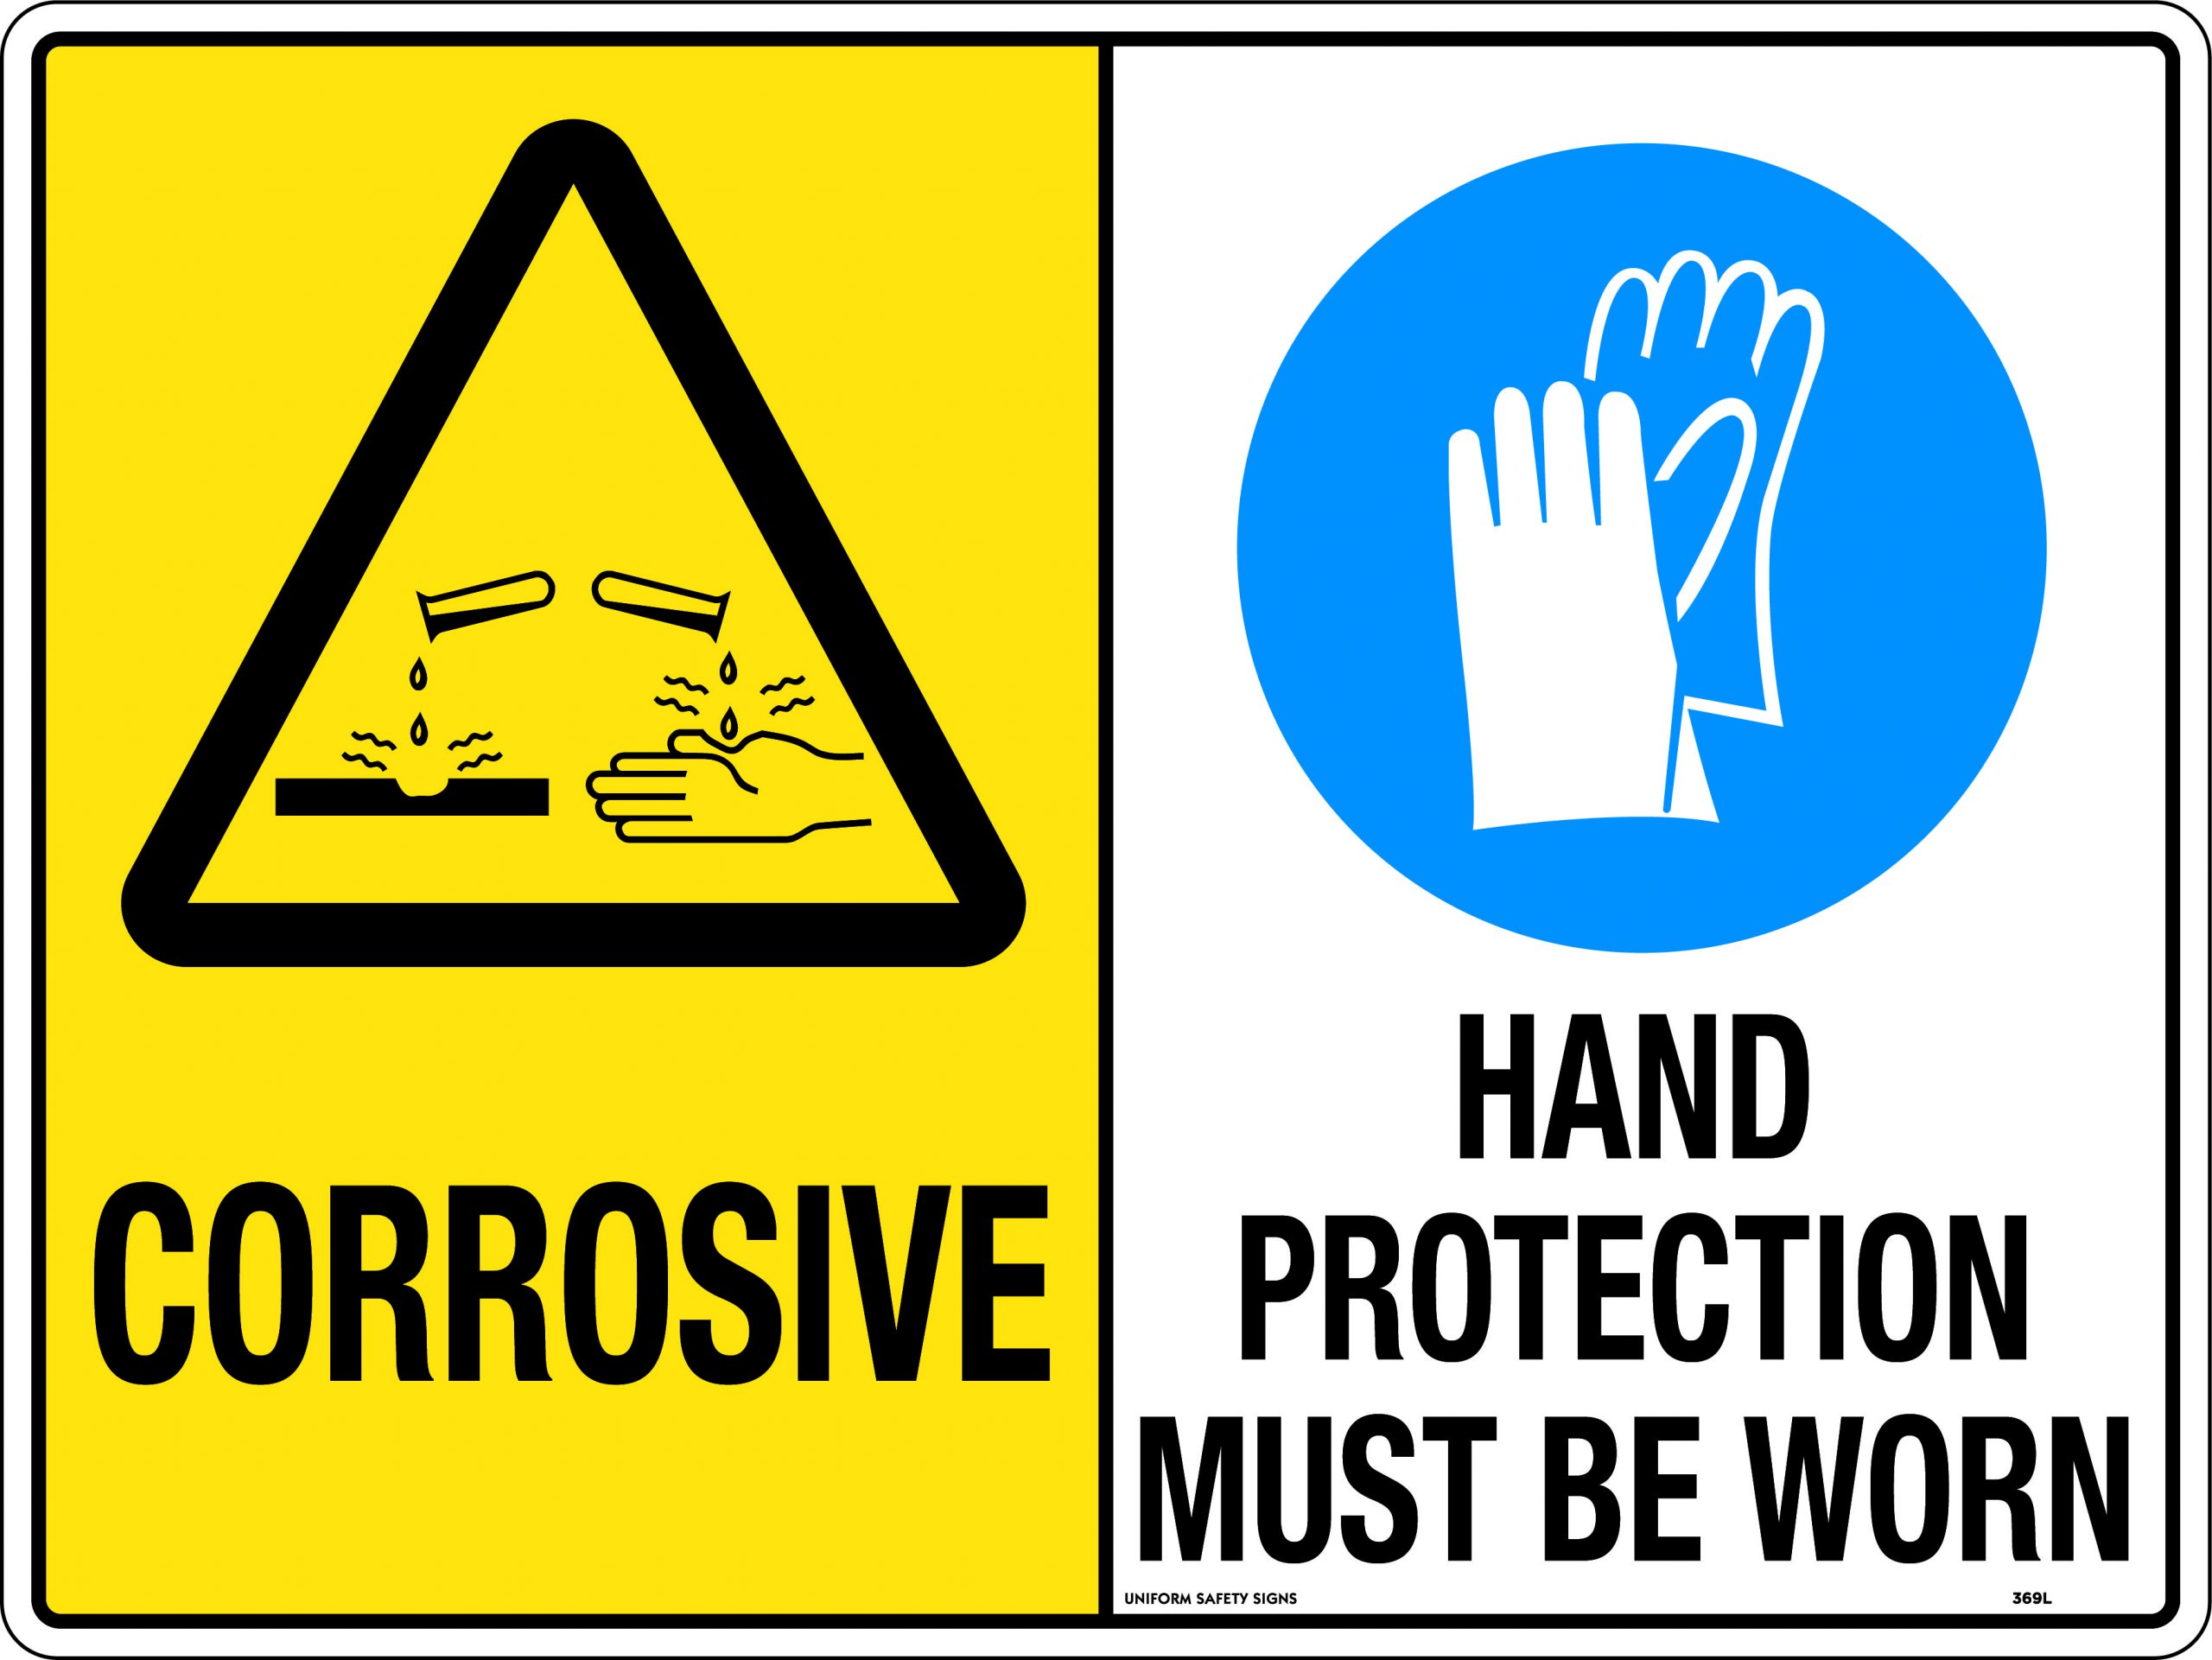 UNIFORM SAFETY 450X300MM METAL MULTI SIGN CORROSIVE / HAND PROTECTION